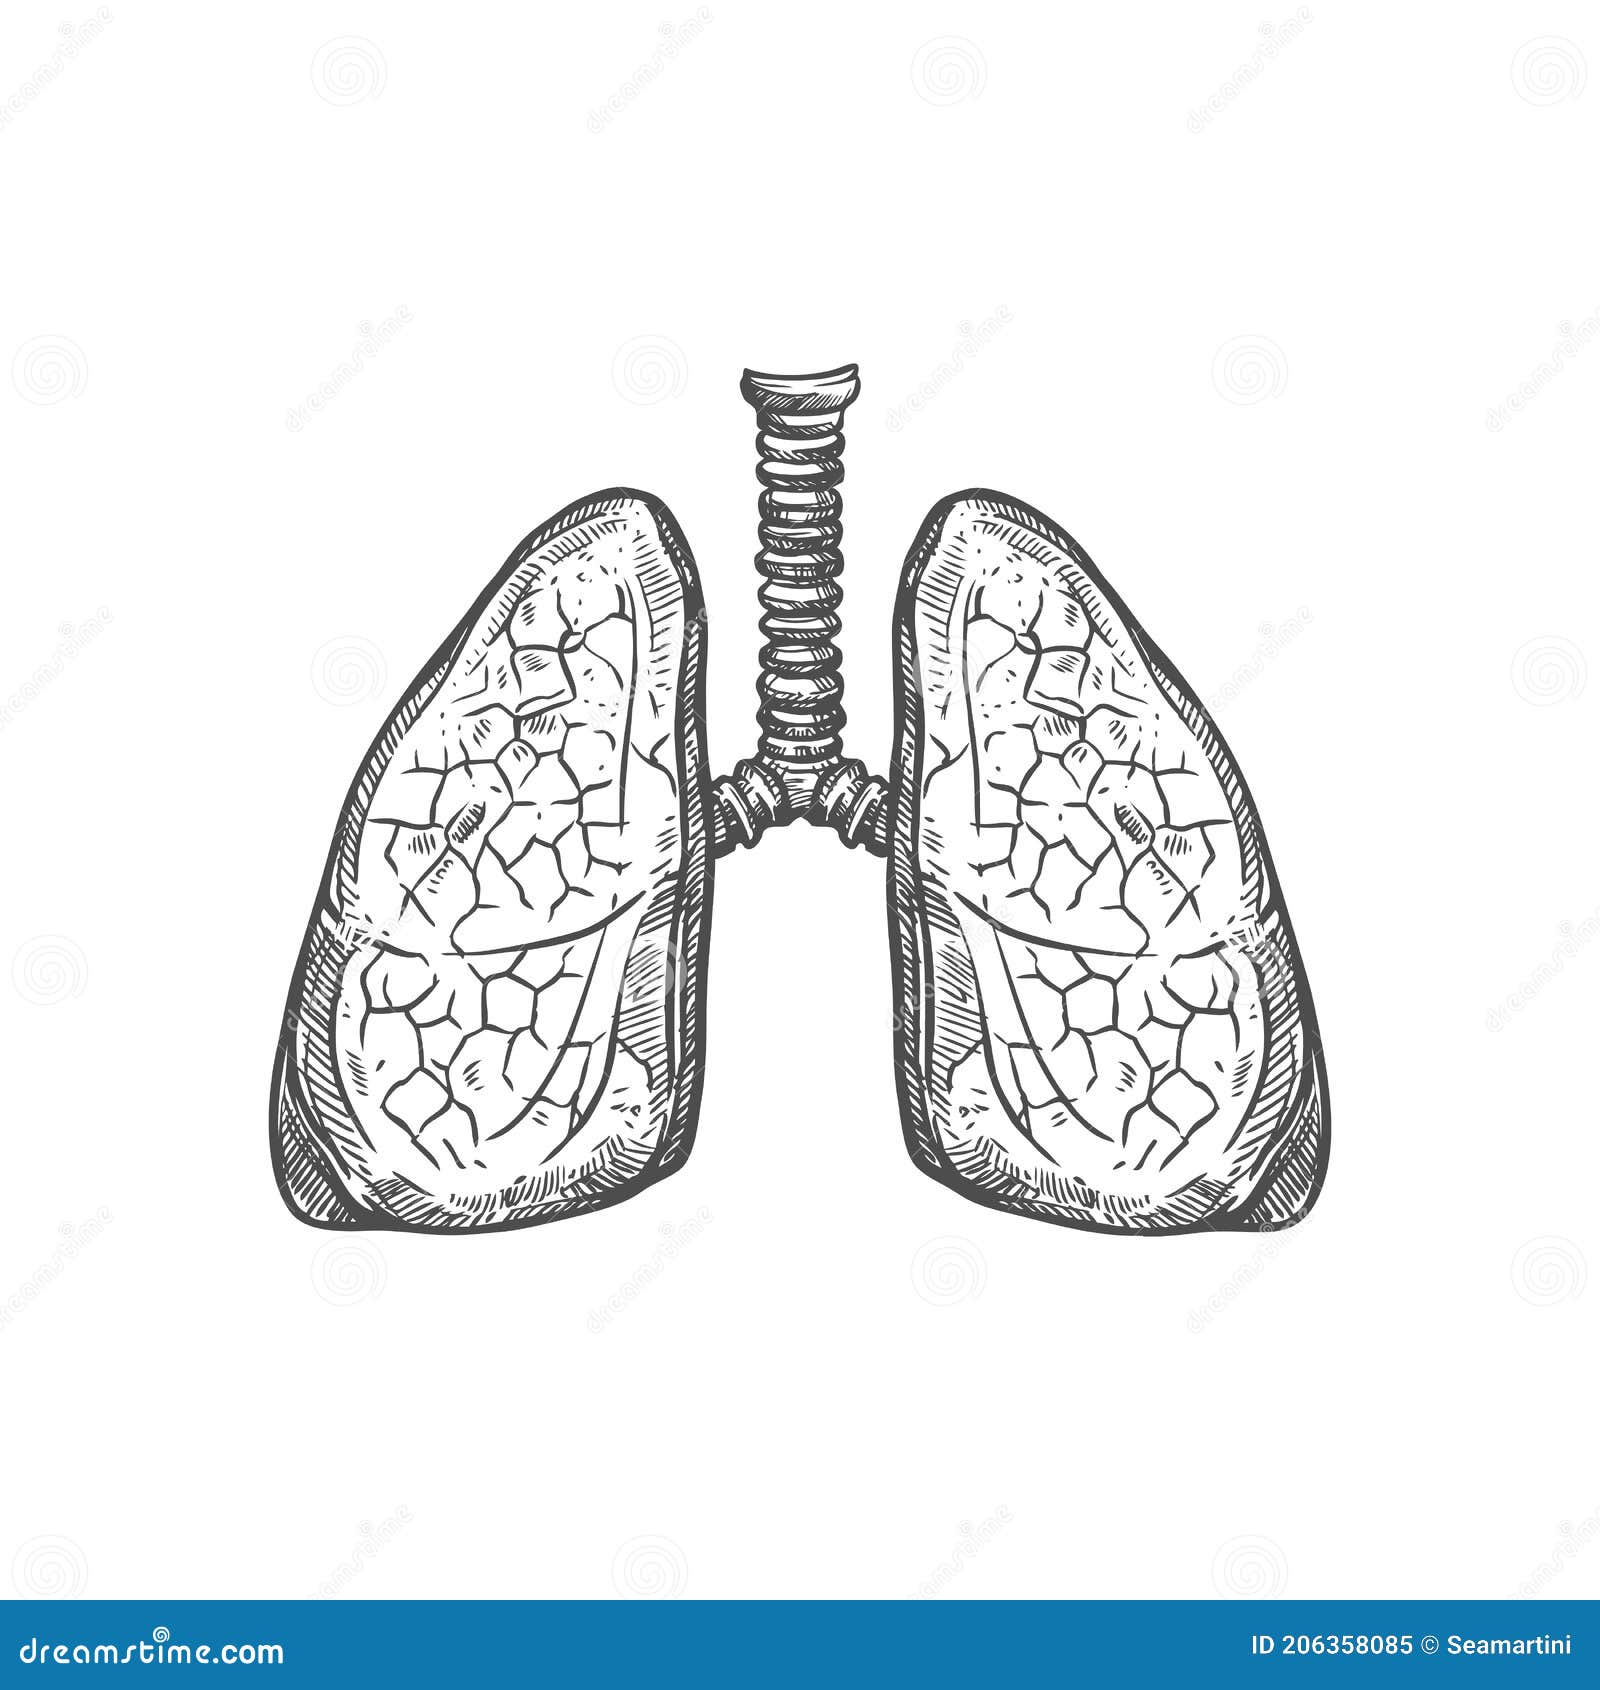 Lung diagram  Lungs image  Simple lungs diagram  Lungs drawing Lunges  Lung anatomy